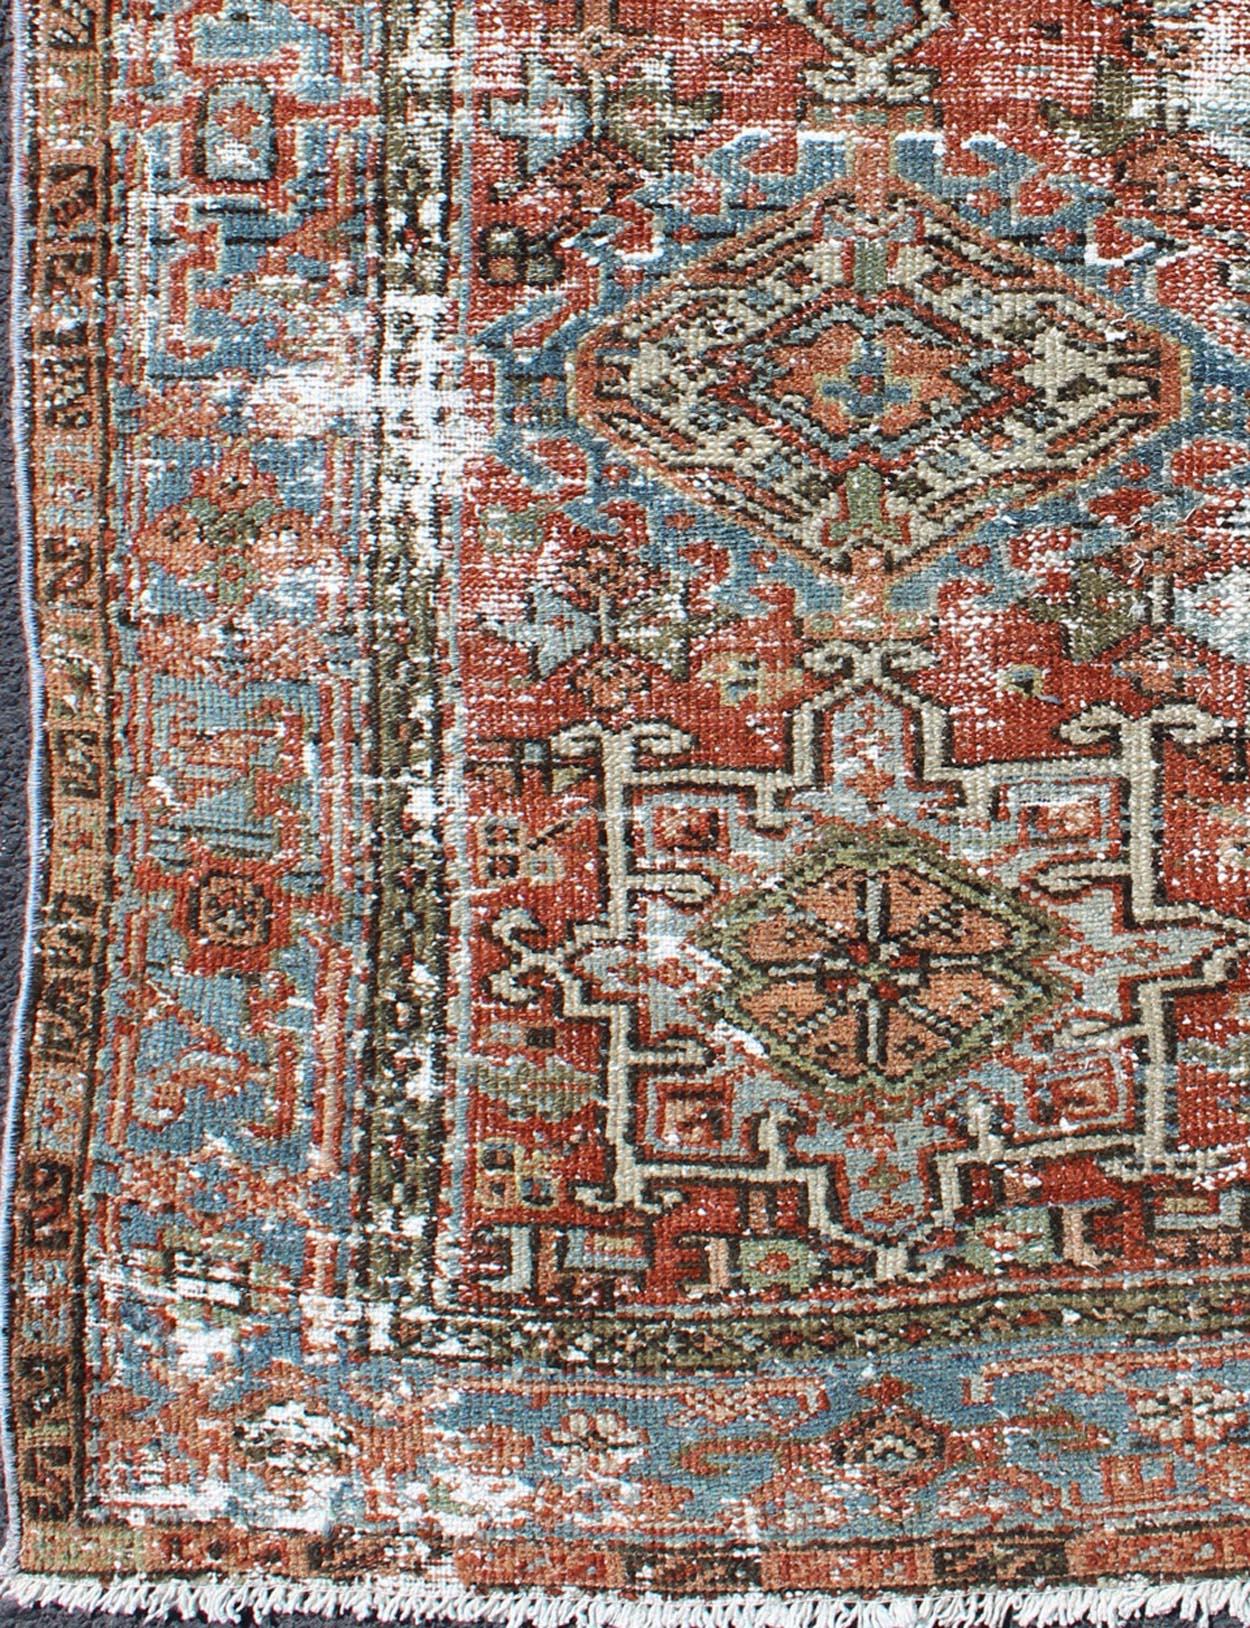 Persian Karadjeh antique rug with distressed geometric design in shades of red with dark accents, rug gng-4748, country of origin / type: Iran / Karadjeh, circa 1920

This early 20th century, handwoven antique Persian Karadjeh rug features a